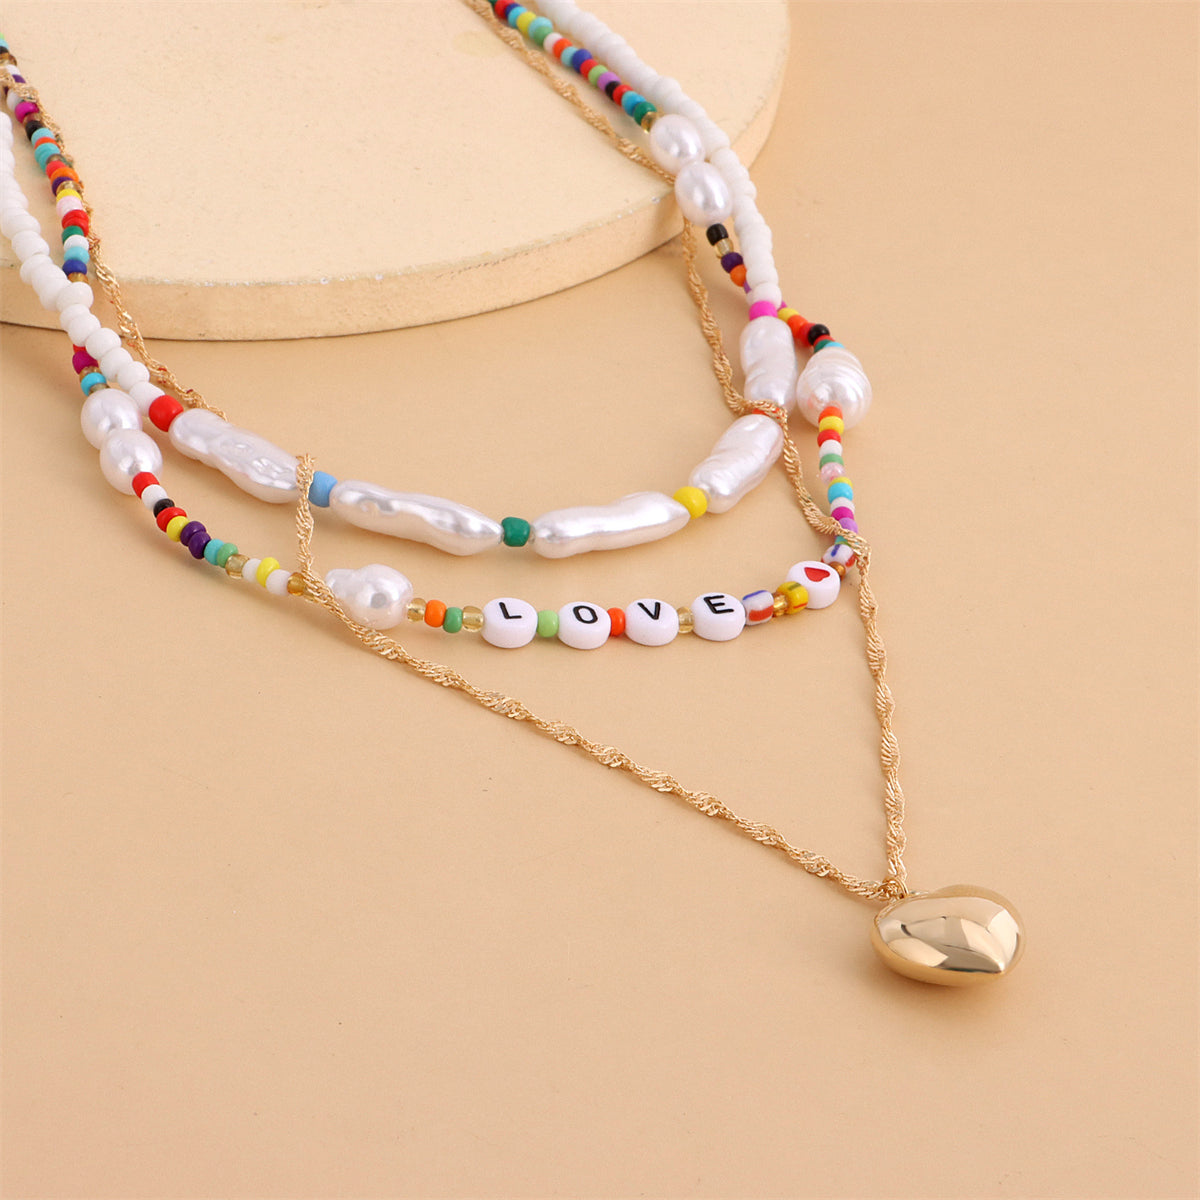 Multicolor Howlite & Pearl 18K Gold-Plated Heart Layered Pendant Necklace